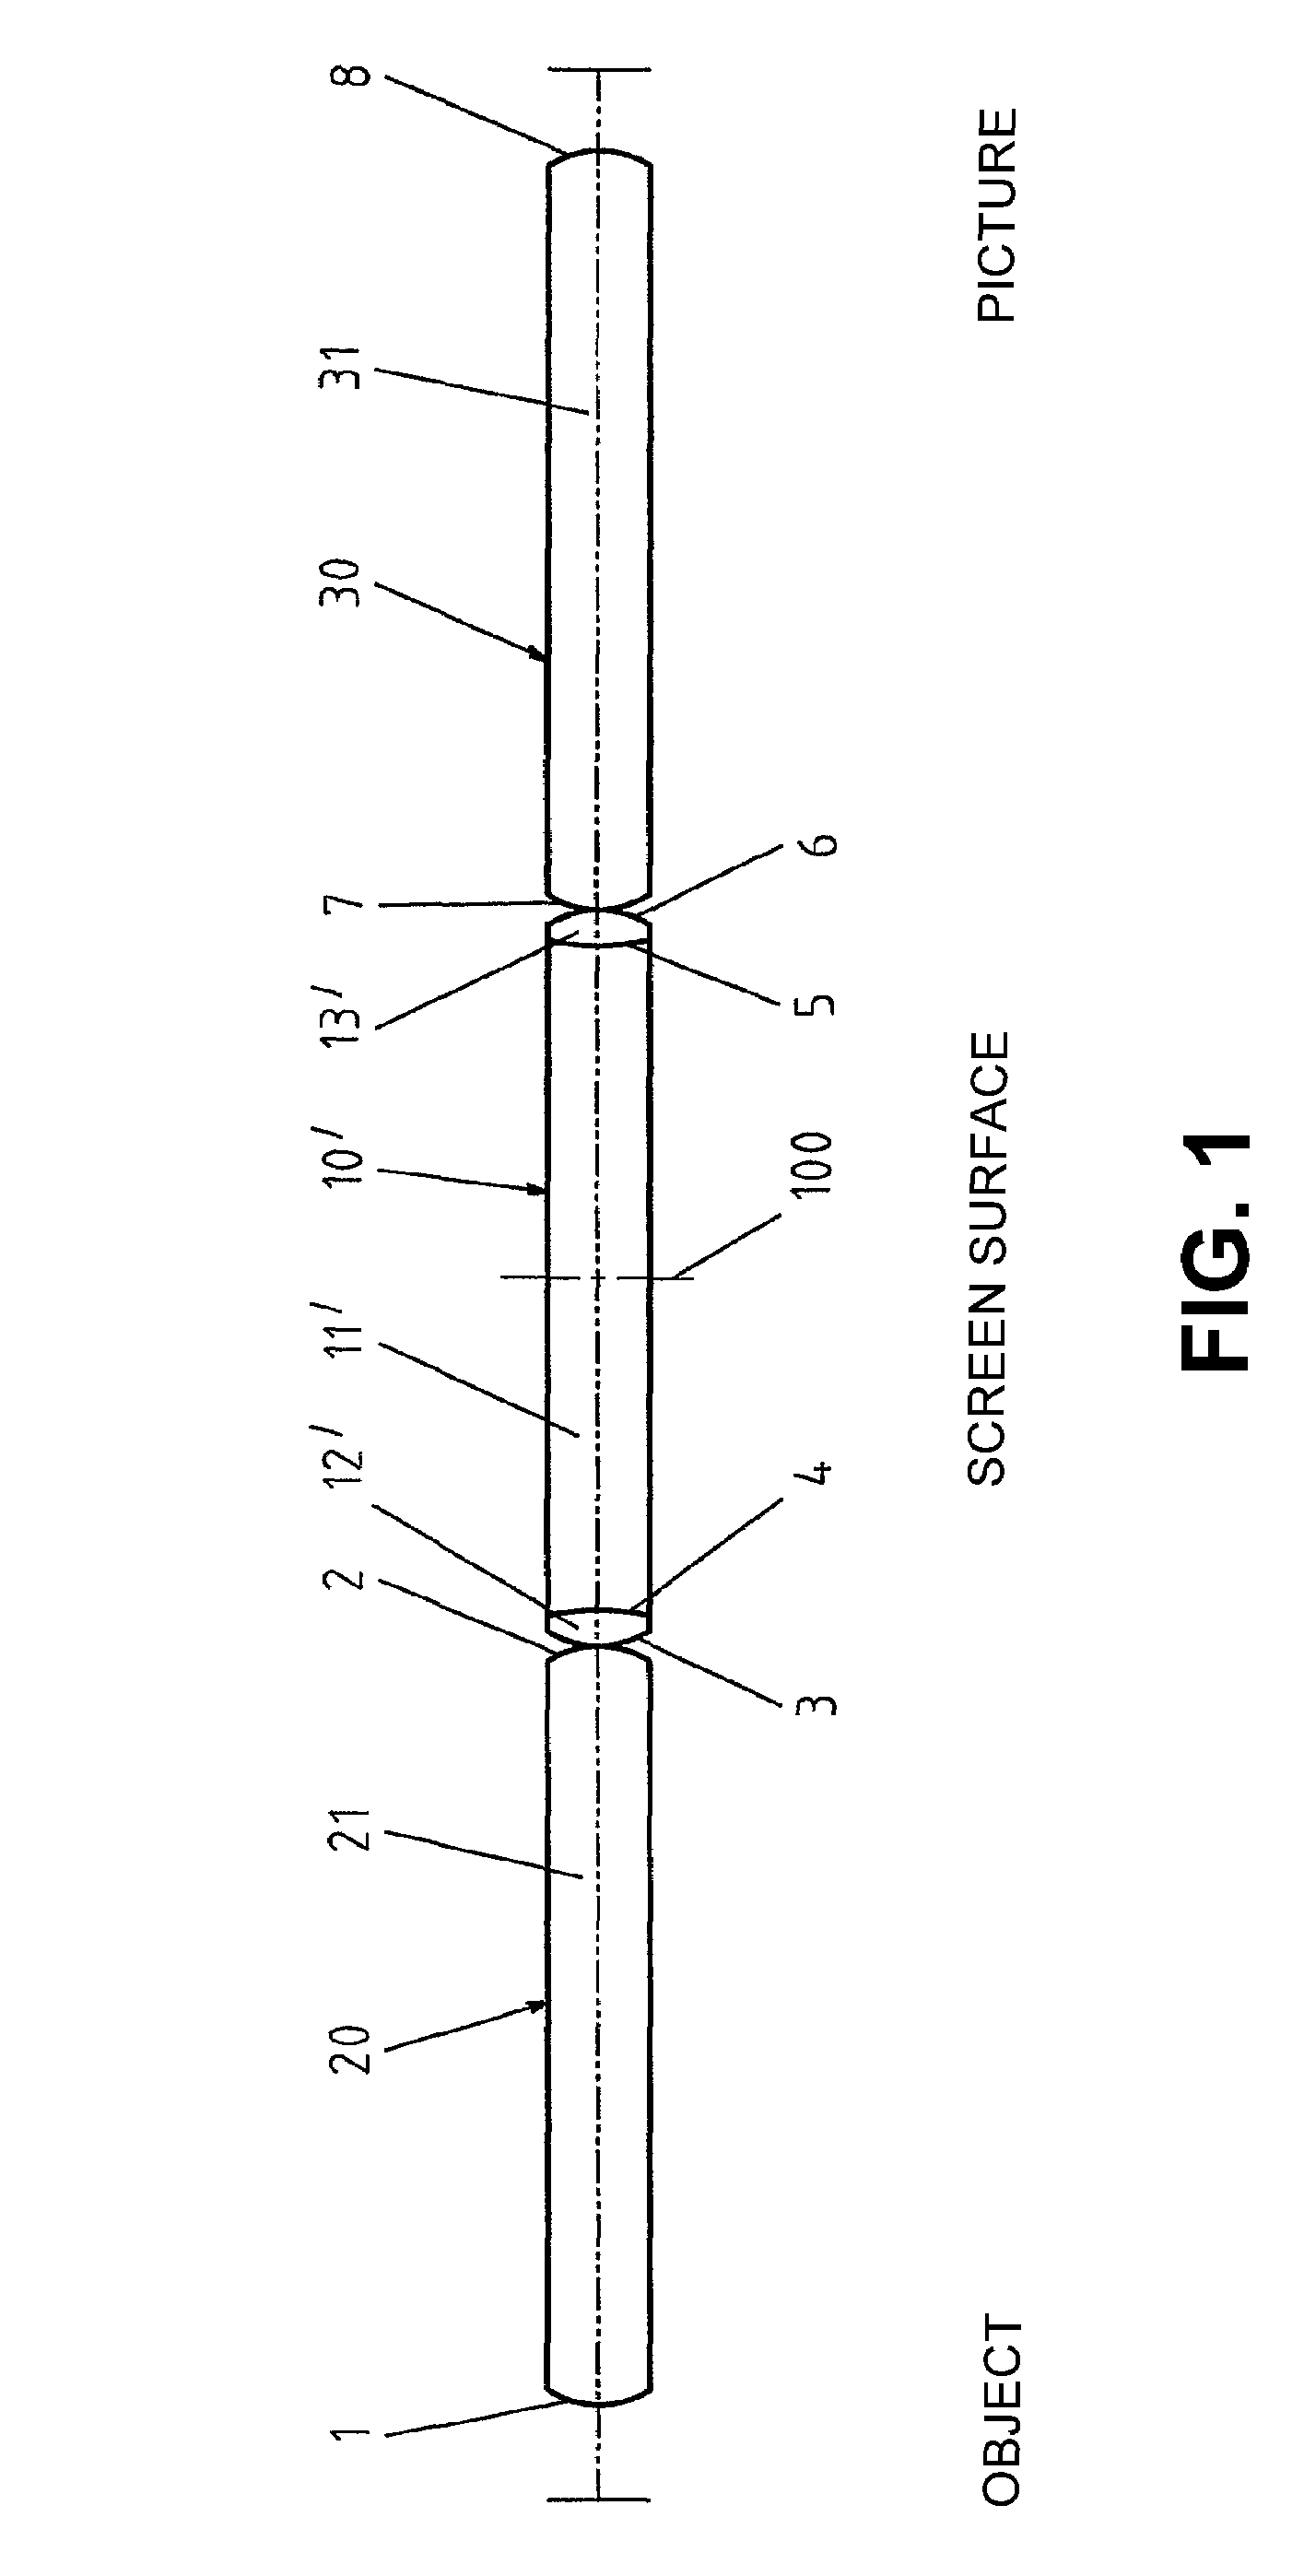 Image transmission system from three rod lenses for rigid endoscopes